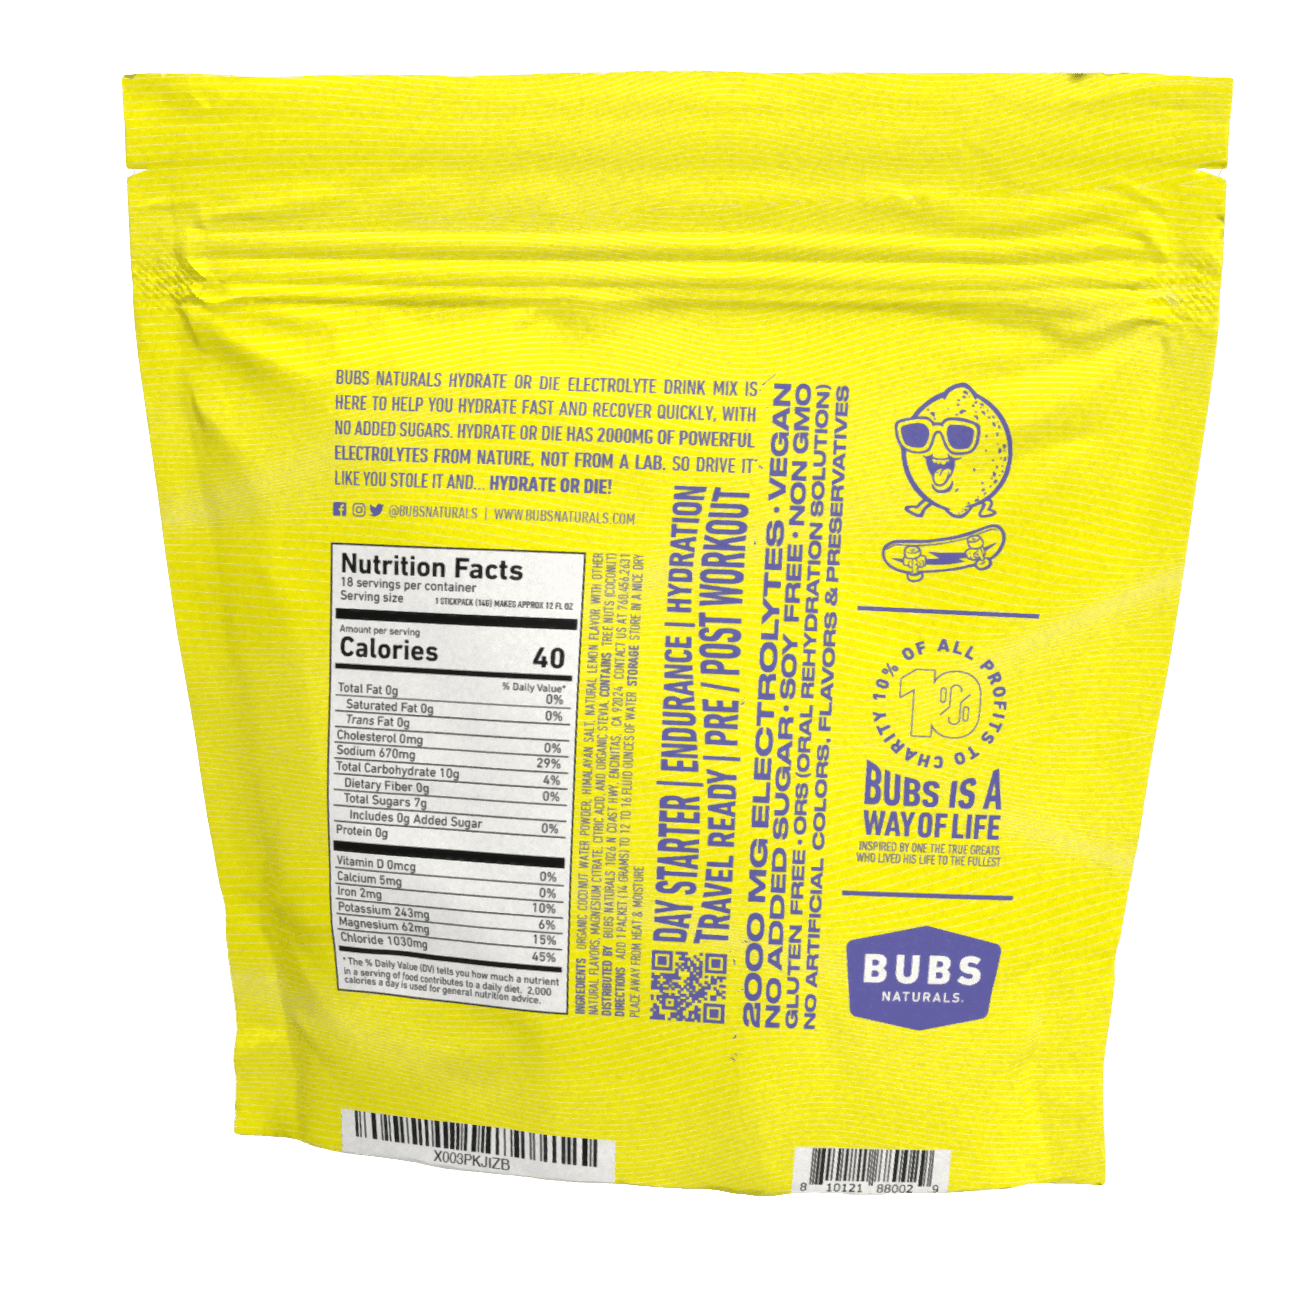 BUBS Naturals Hydrate or Die, 18 count bag,  Natural Electrolytes, Lemon, Back right